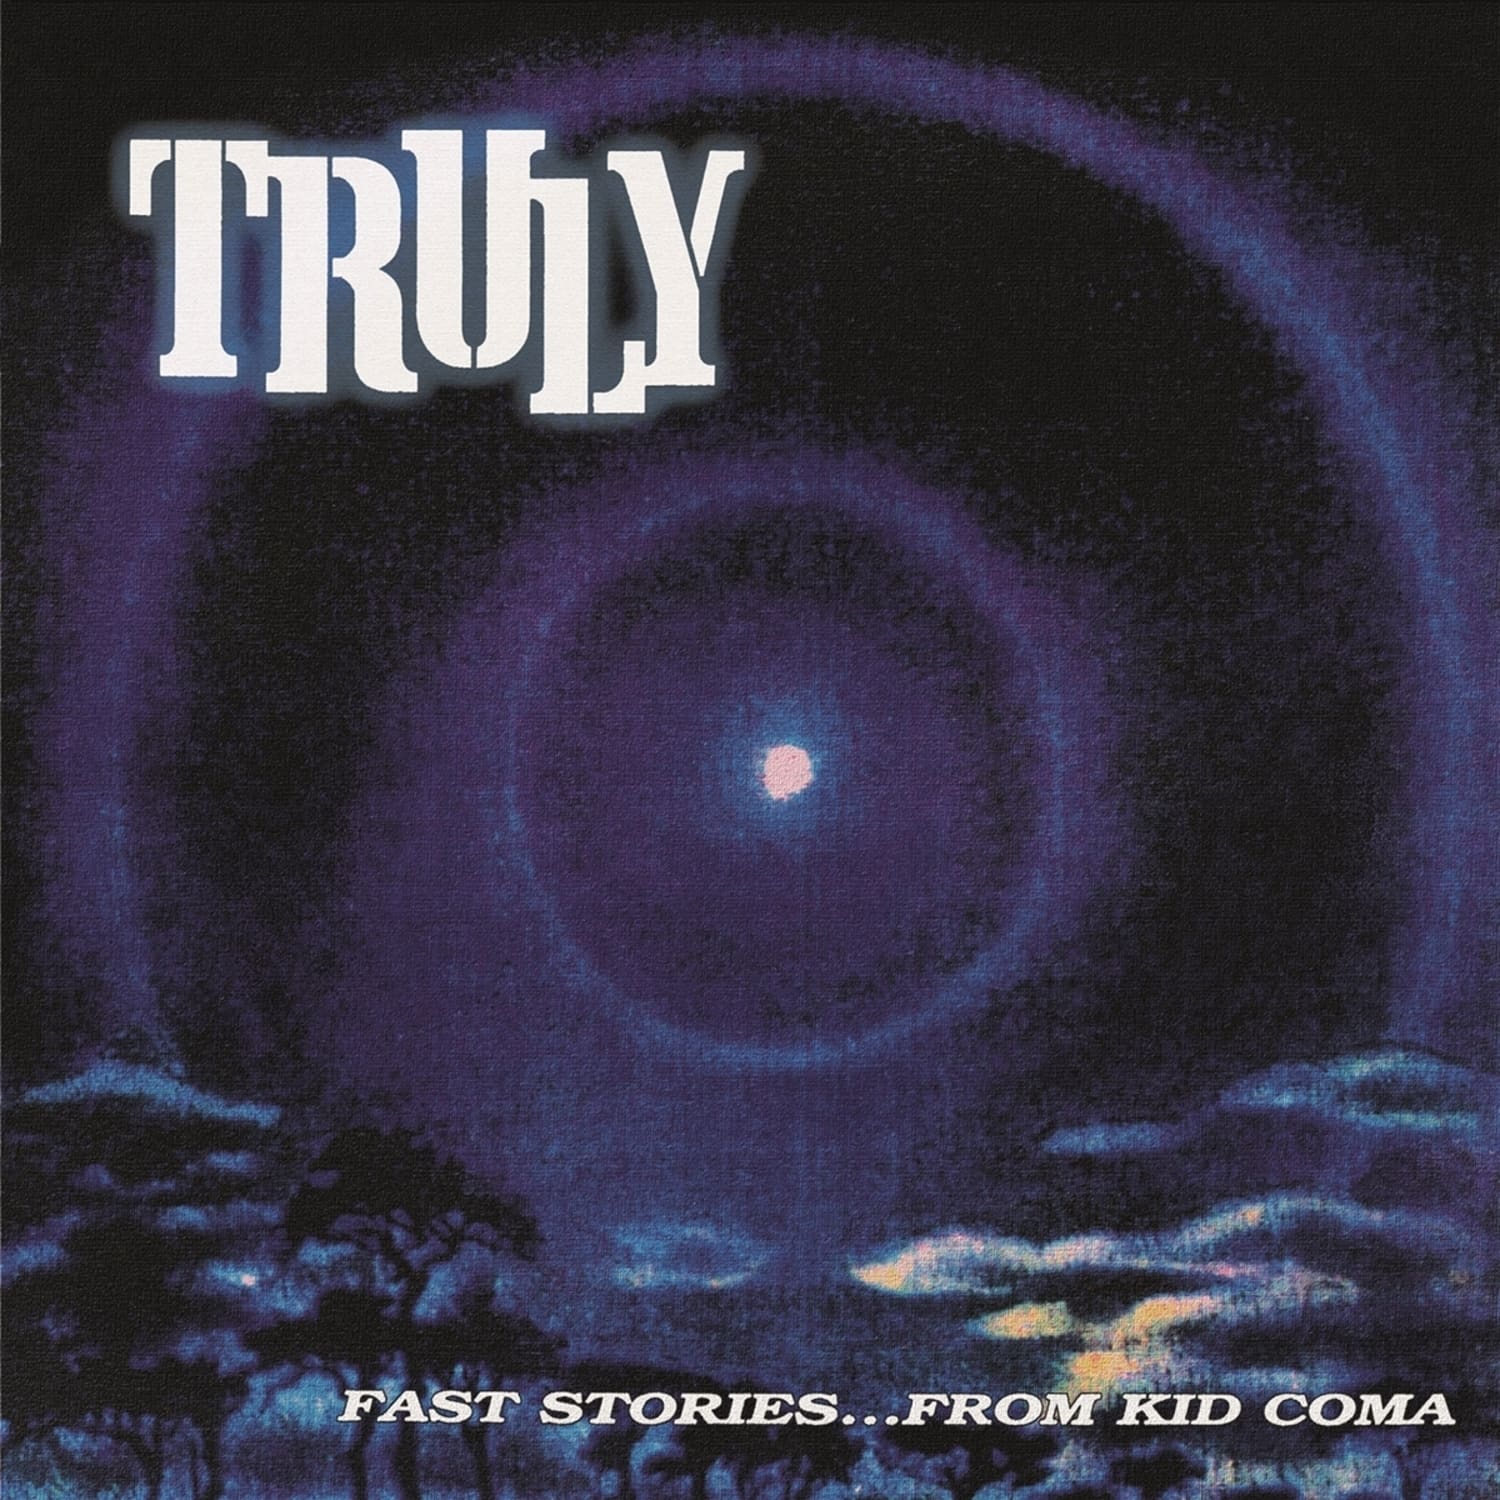 Truly - FAST STORIES...FROM THE KID COMA 